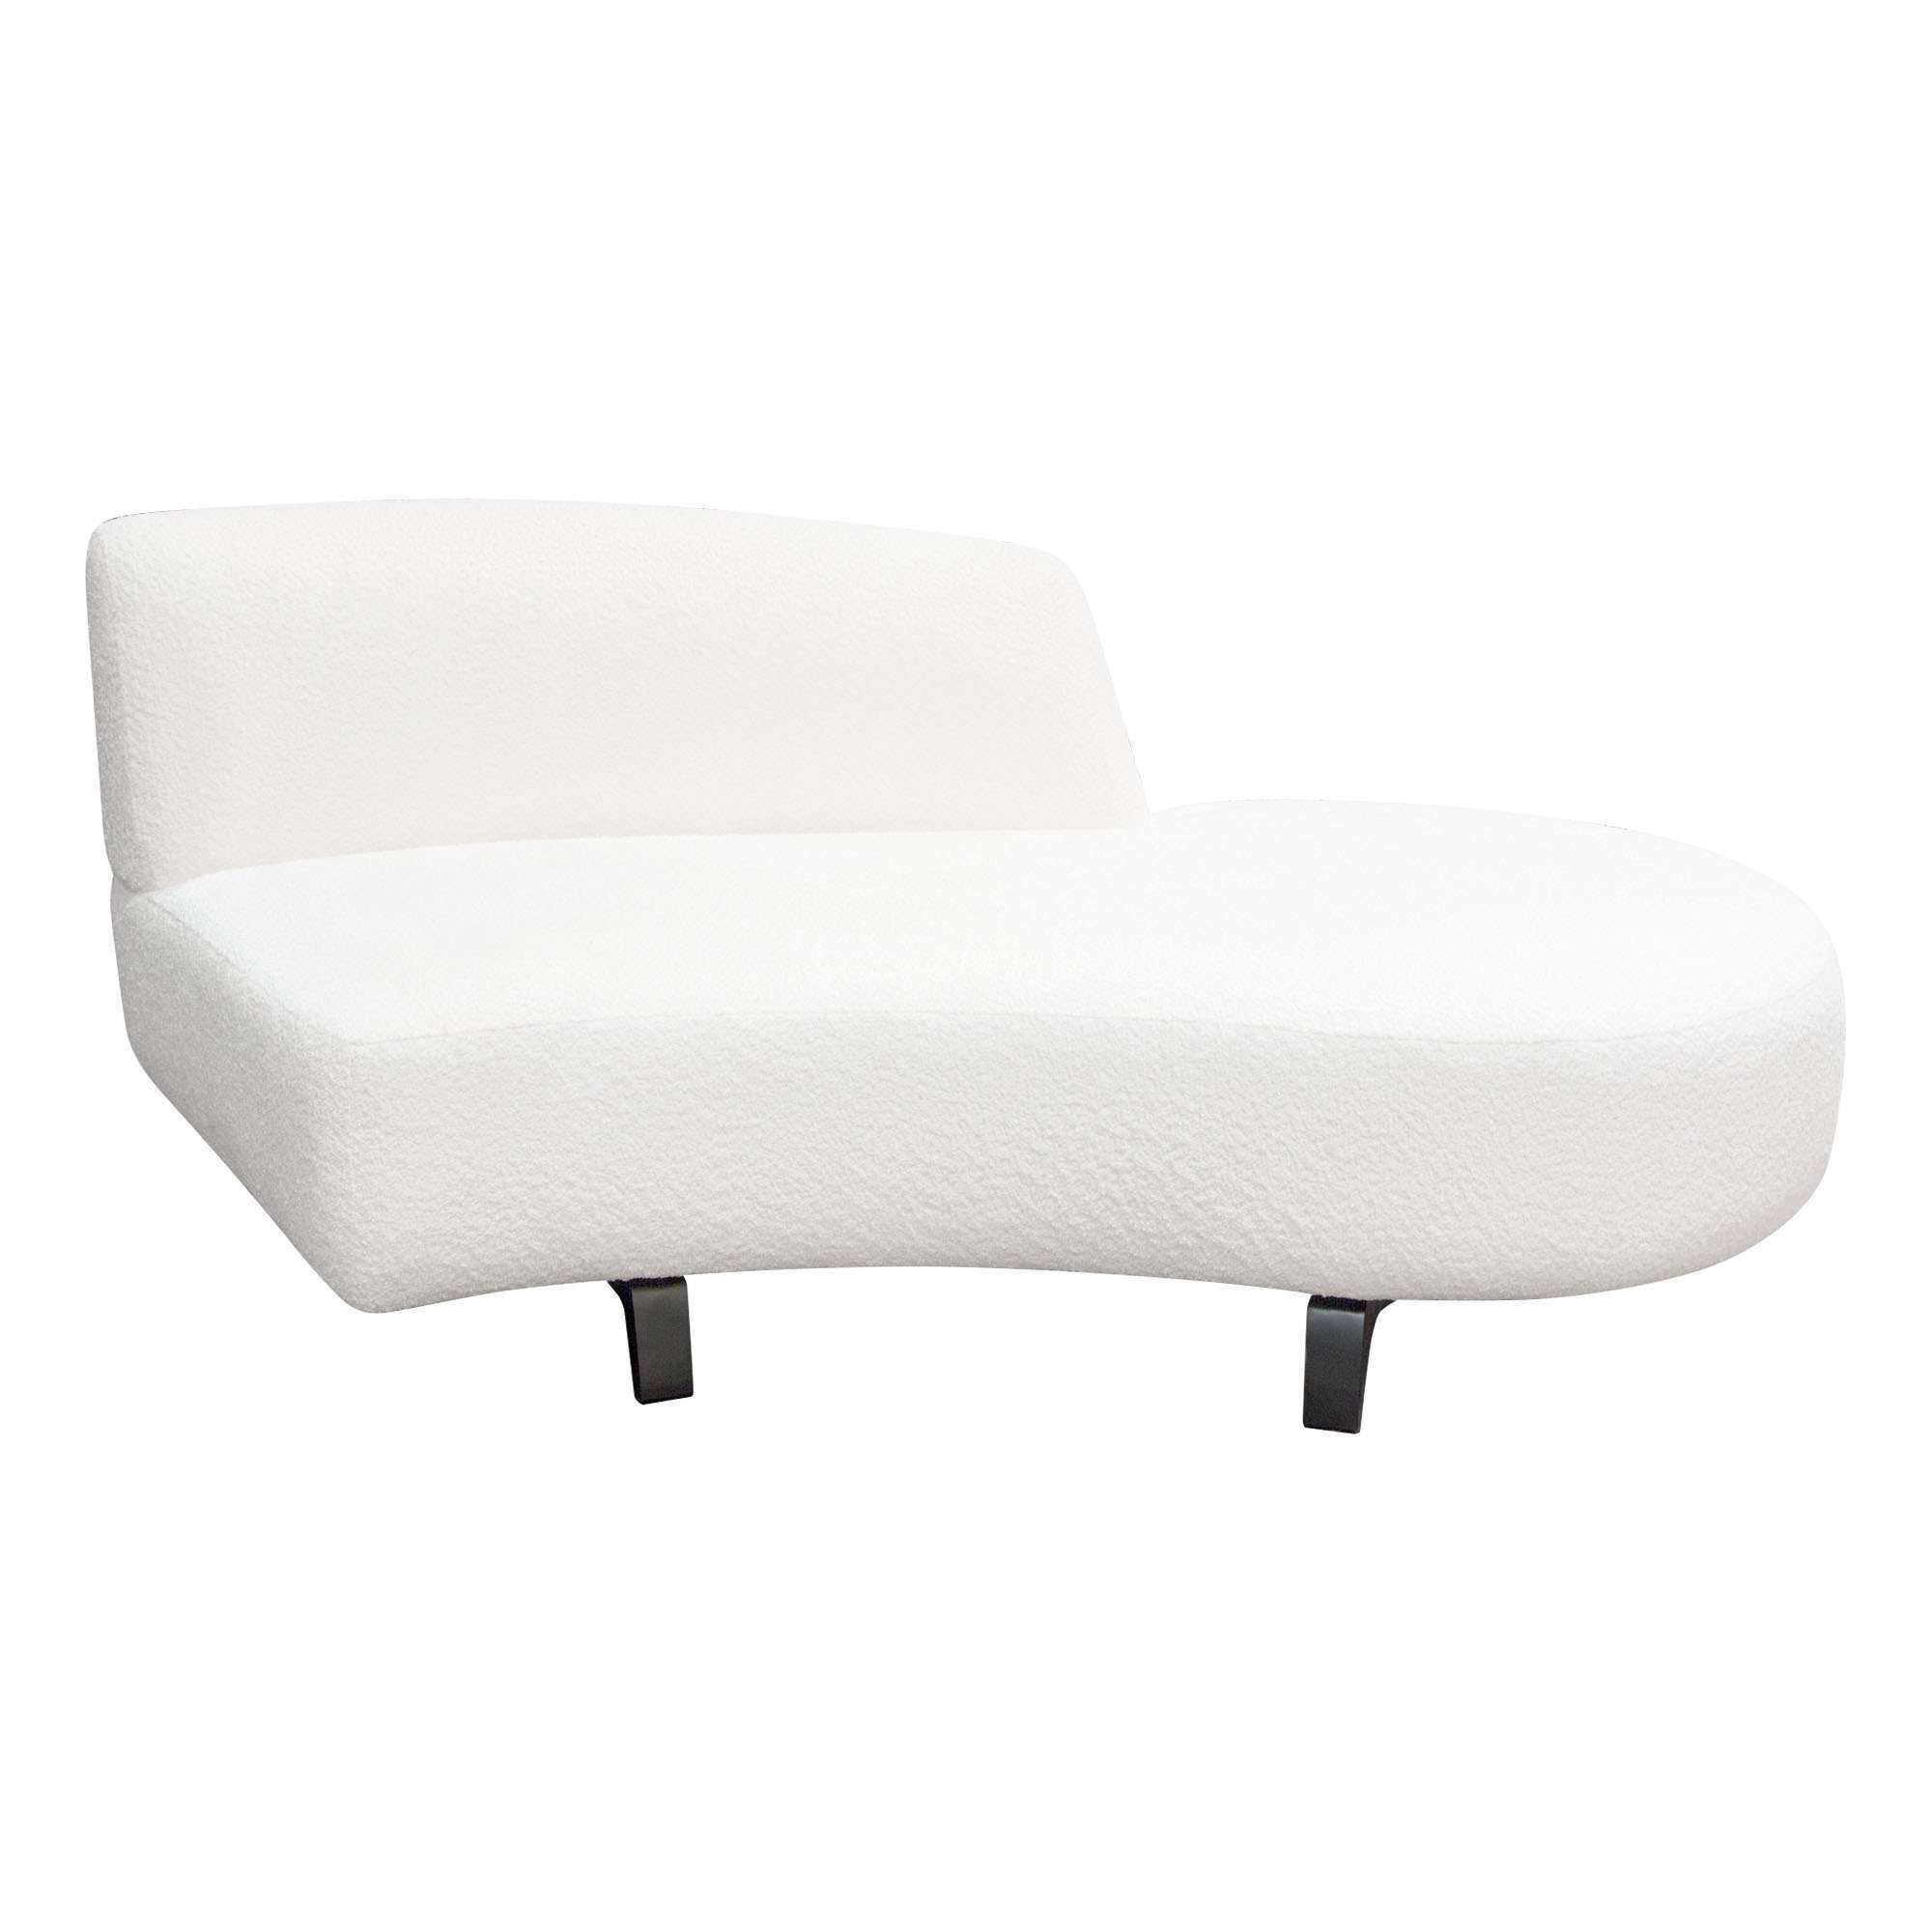 Vesper Curved Armless Right Chaise in Faux White Shearling w/ Black Wood Leg Base by Diamond Sofa - Decorian Group